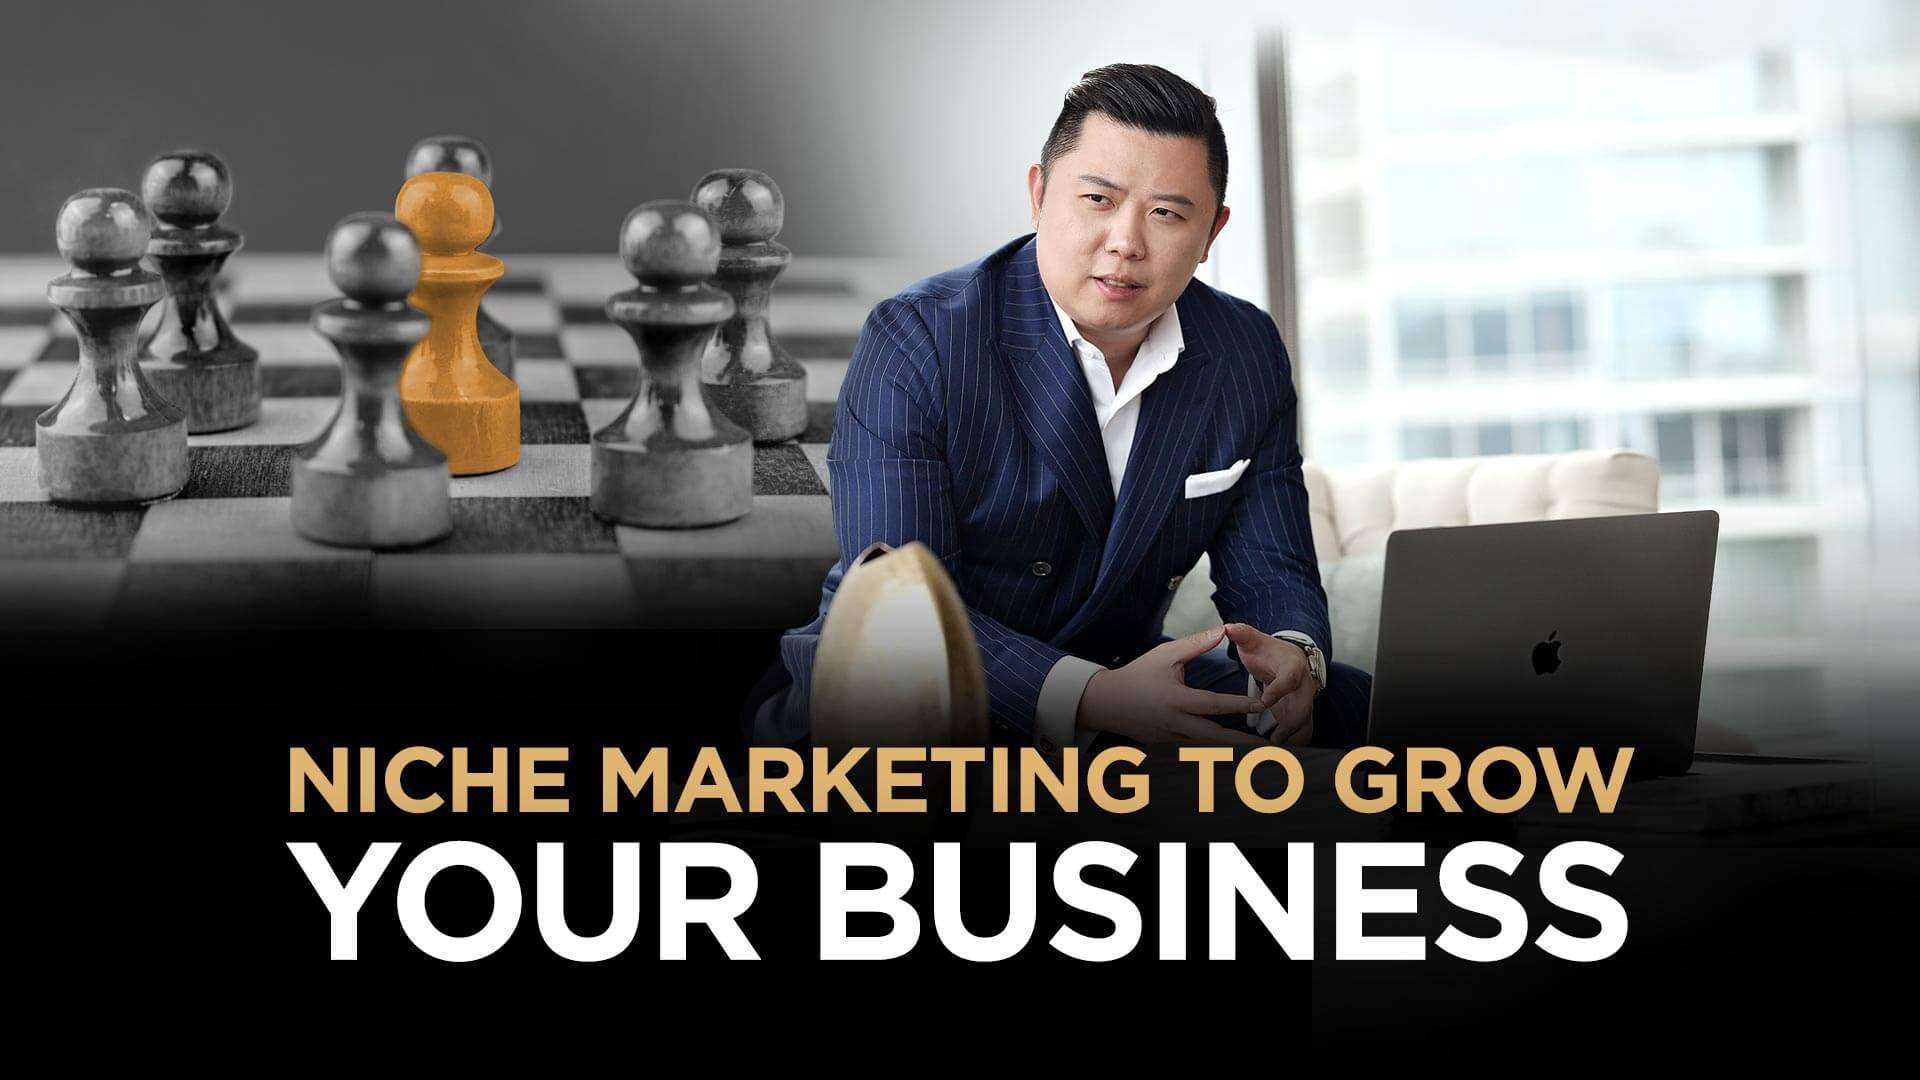 Niche Marketing to Grow Your Business